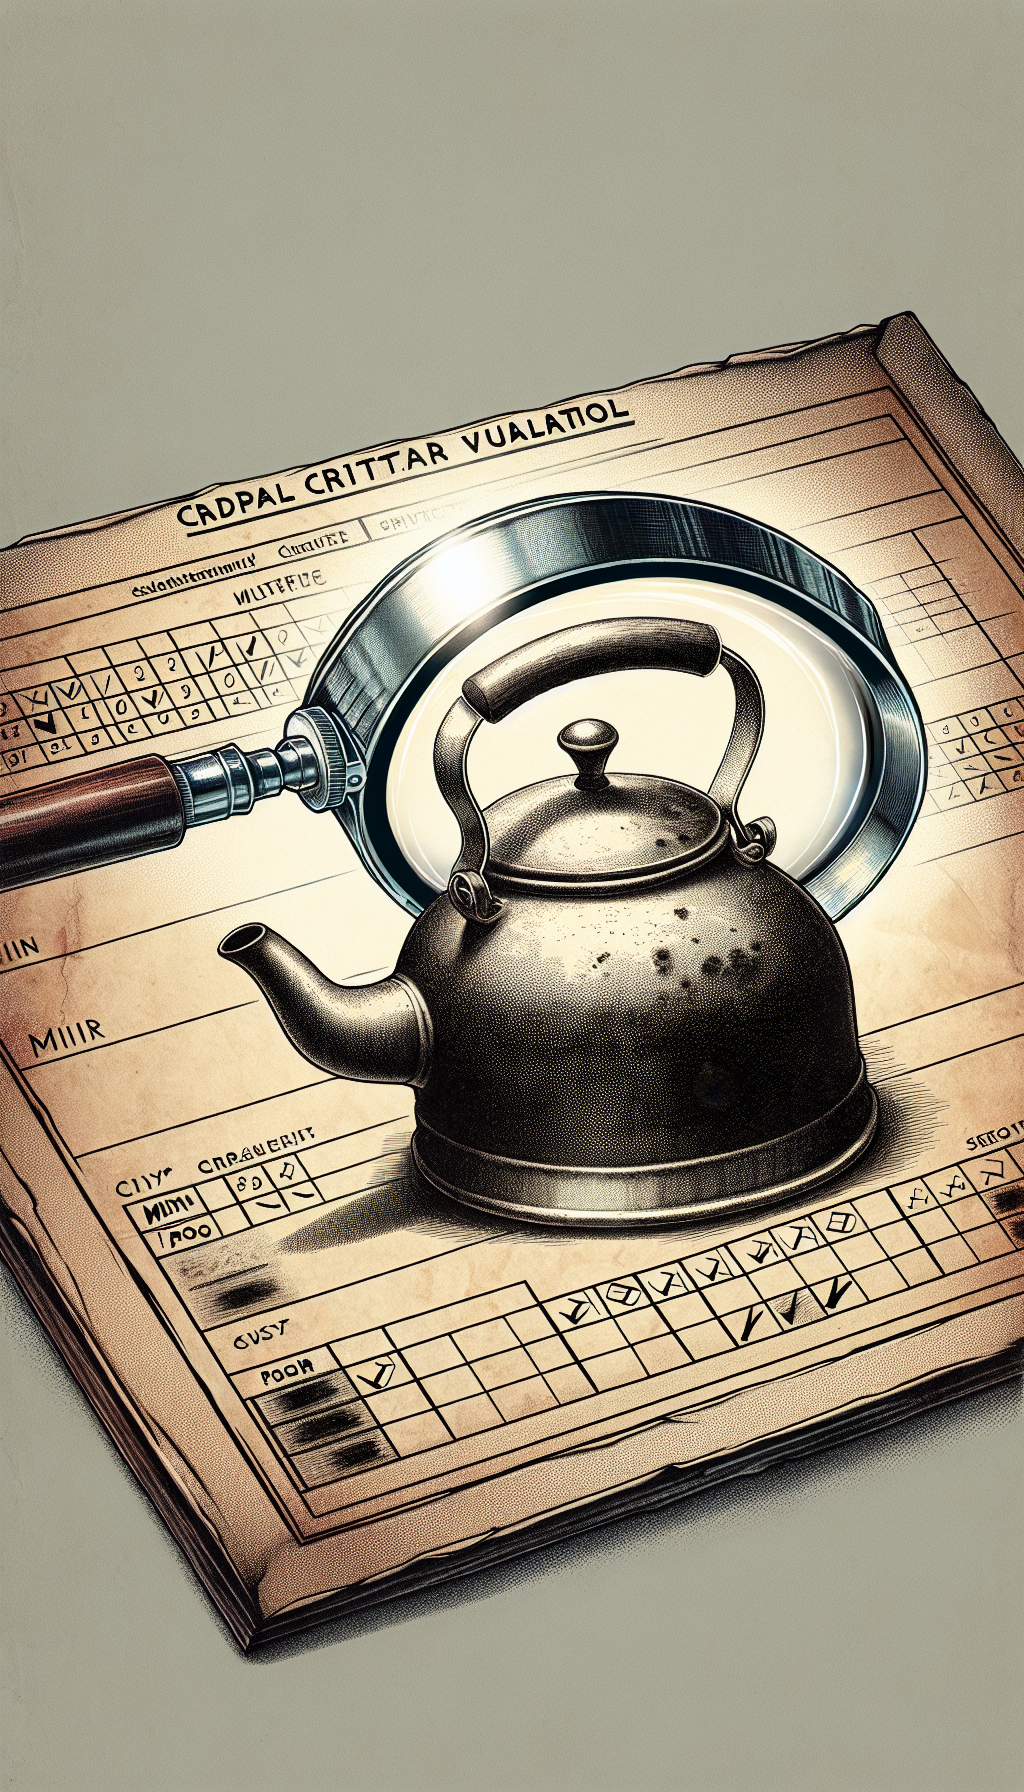 An illustration depicting a magnifying glass examining the surface of an old cast iron kettle, with a transparent scale of conditions ranging from "Mint" to "Poor" appearing through the lens, symbolizing critical assessment. The kettle sits atop an antique grading chart, with highlights pointing to unique characteristics that define its value. The art style transitions from photorealism within the magnifying scope to a sketch-like style on the chart's perimeter.